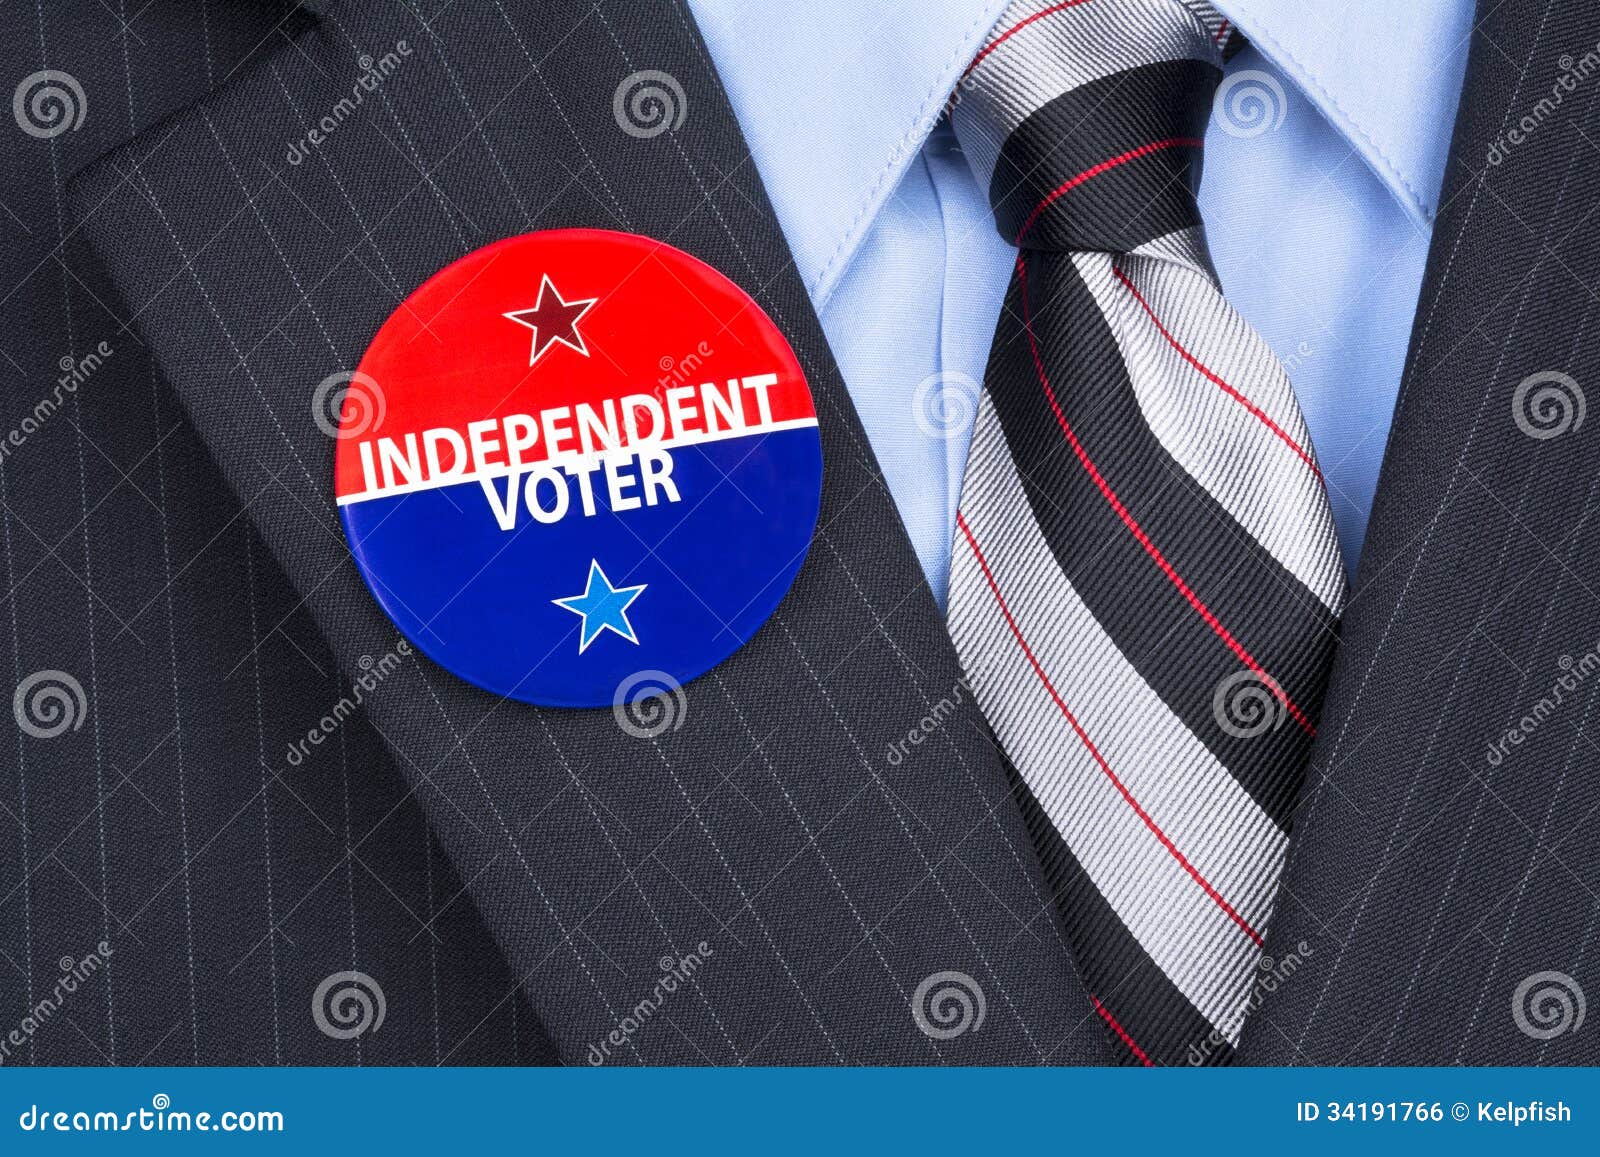 independent voter pin